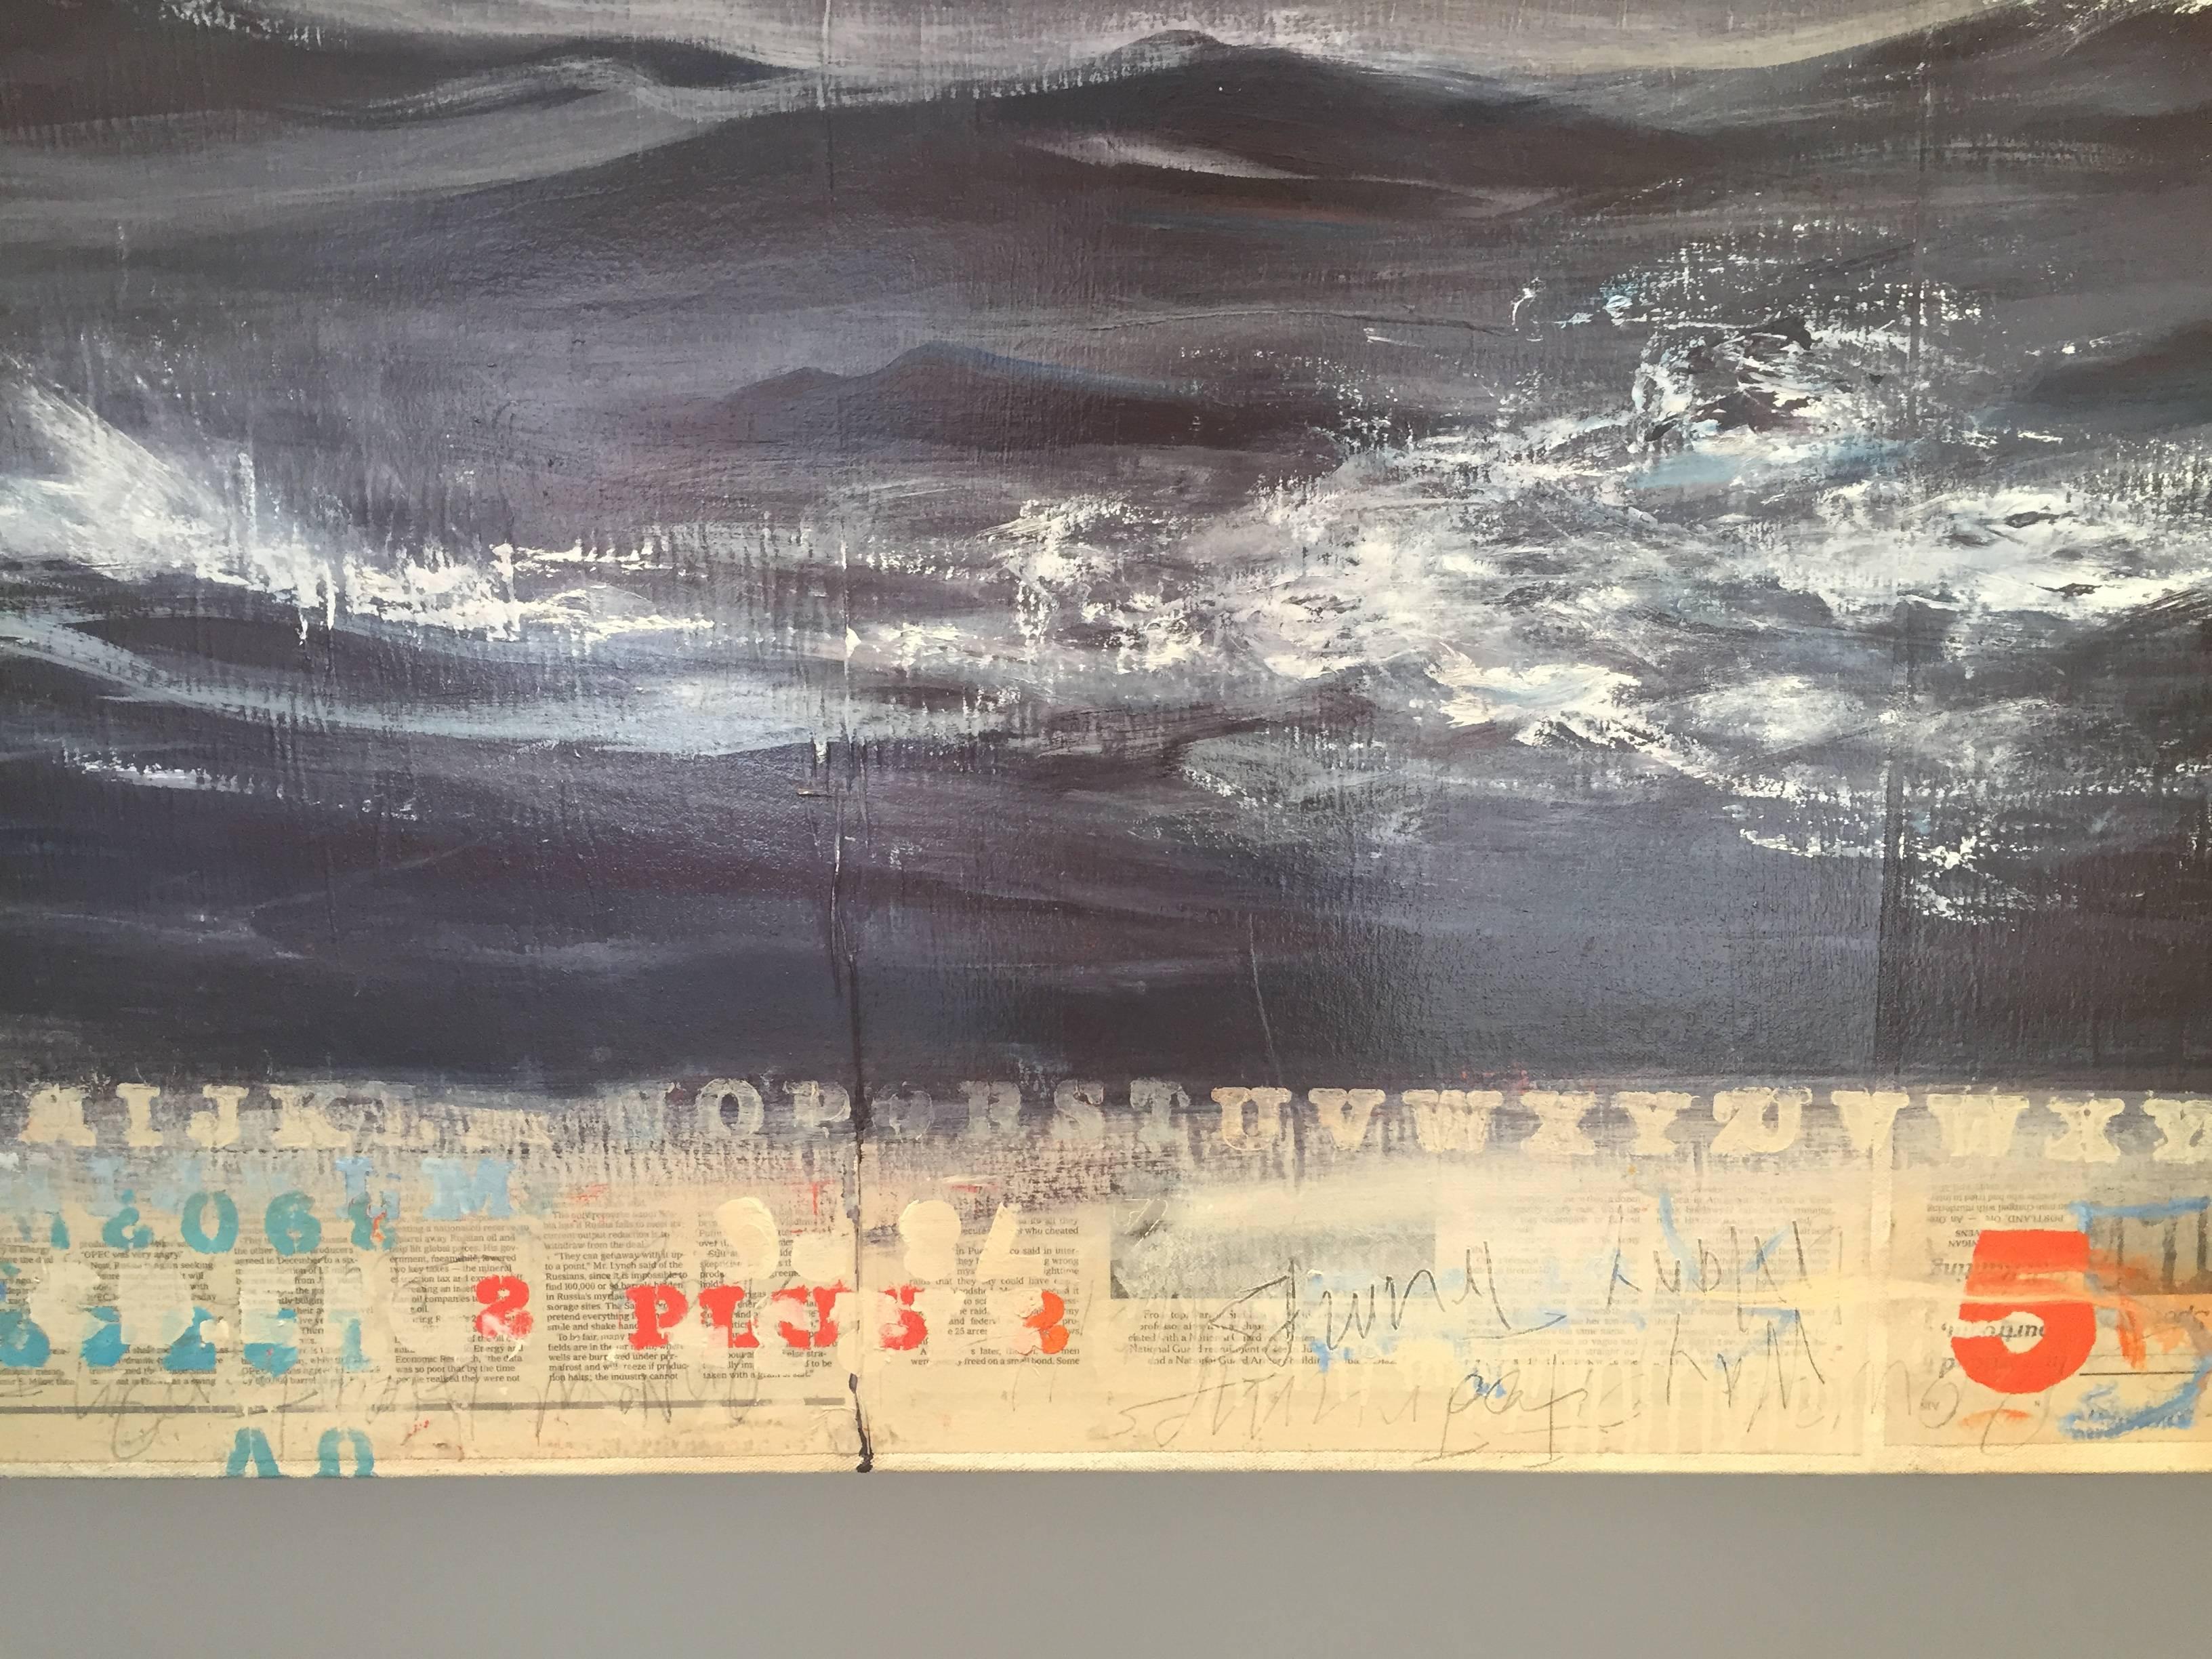 In Old News; Oncoming Storm, 2017, Straus paints an arresting, realistic seascape upon an array of recent newspapers. Situated within oceanic open waters, a strong current of dark waves reflect the cheerless sky above. Headlines poke out along the